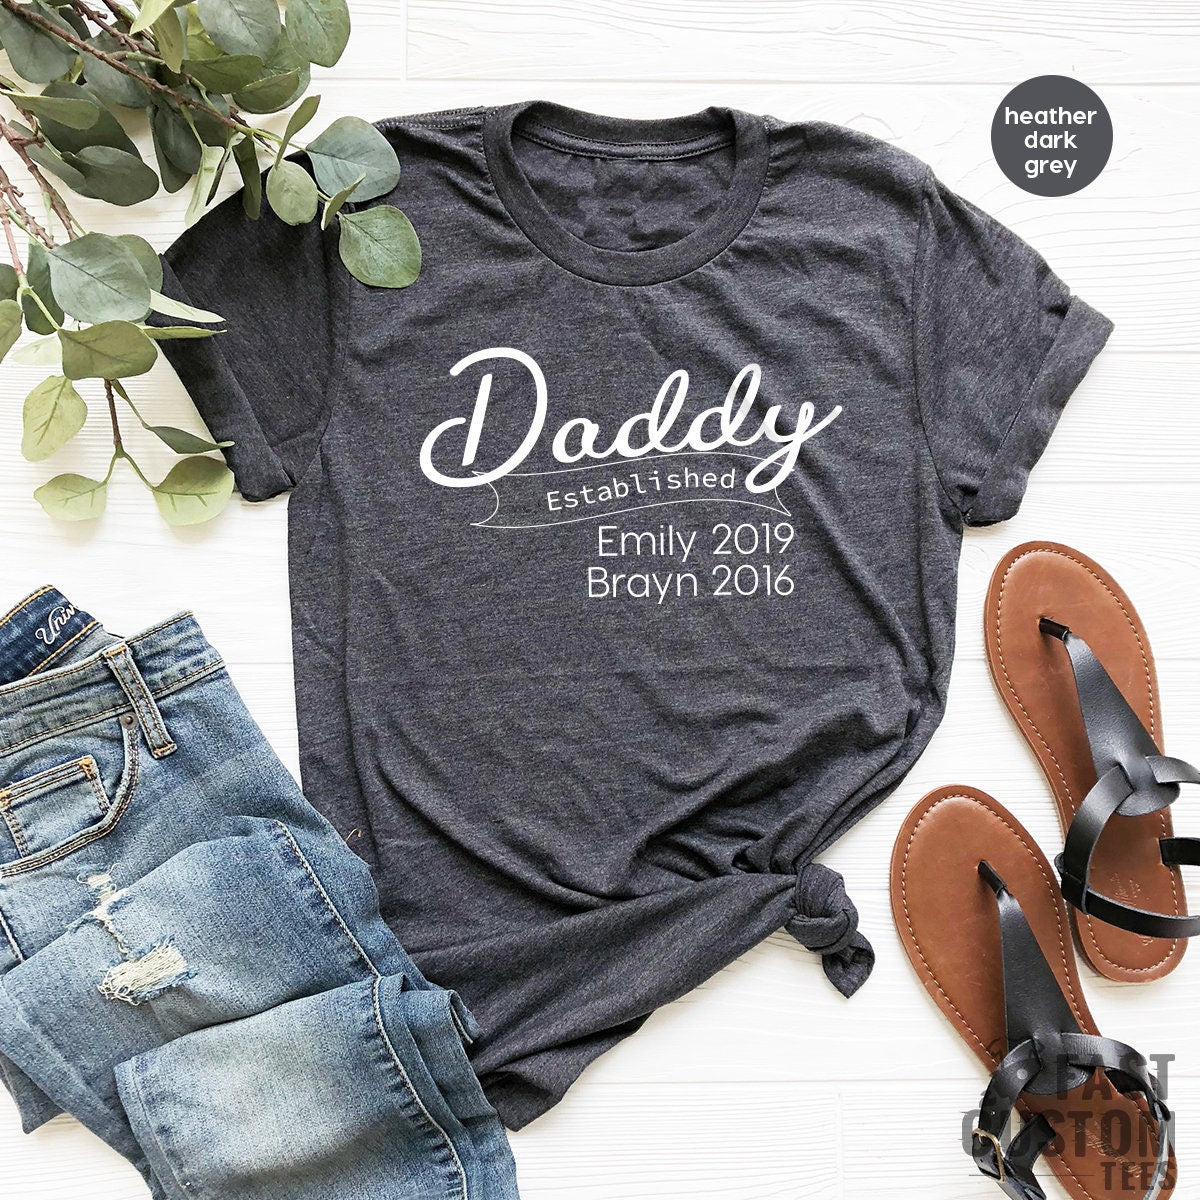 Father's Day Gift Baskets & Boxes for Delivery | Harry & David